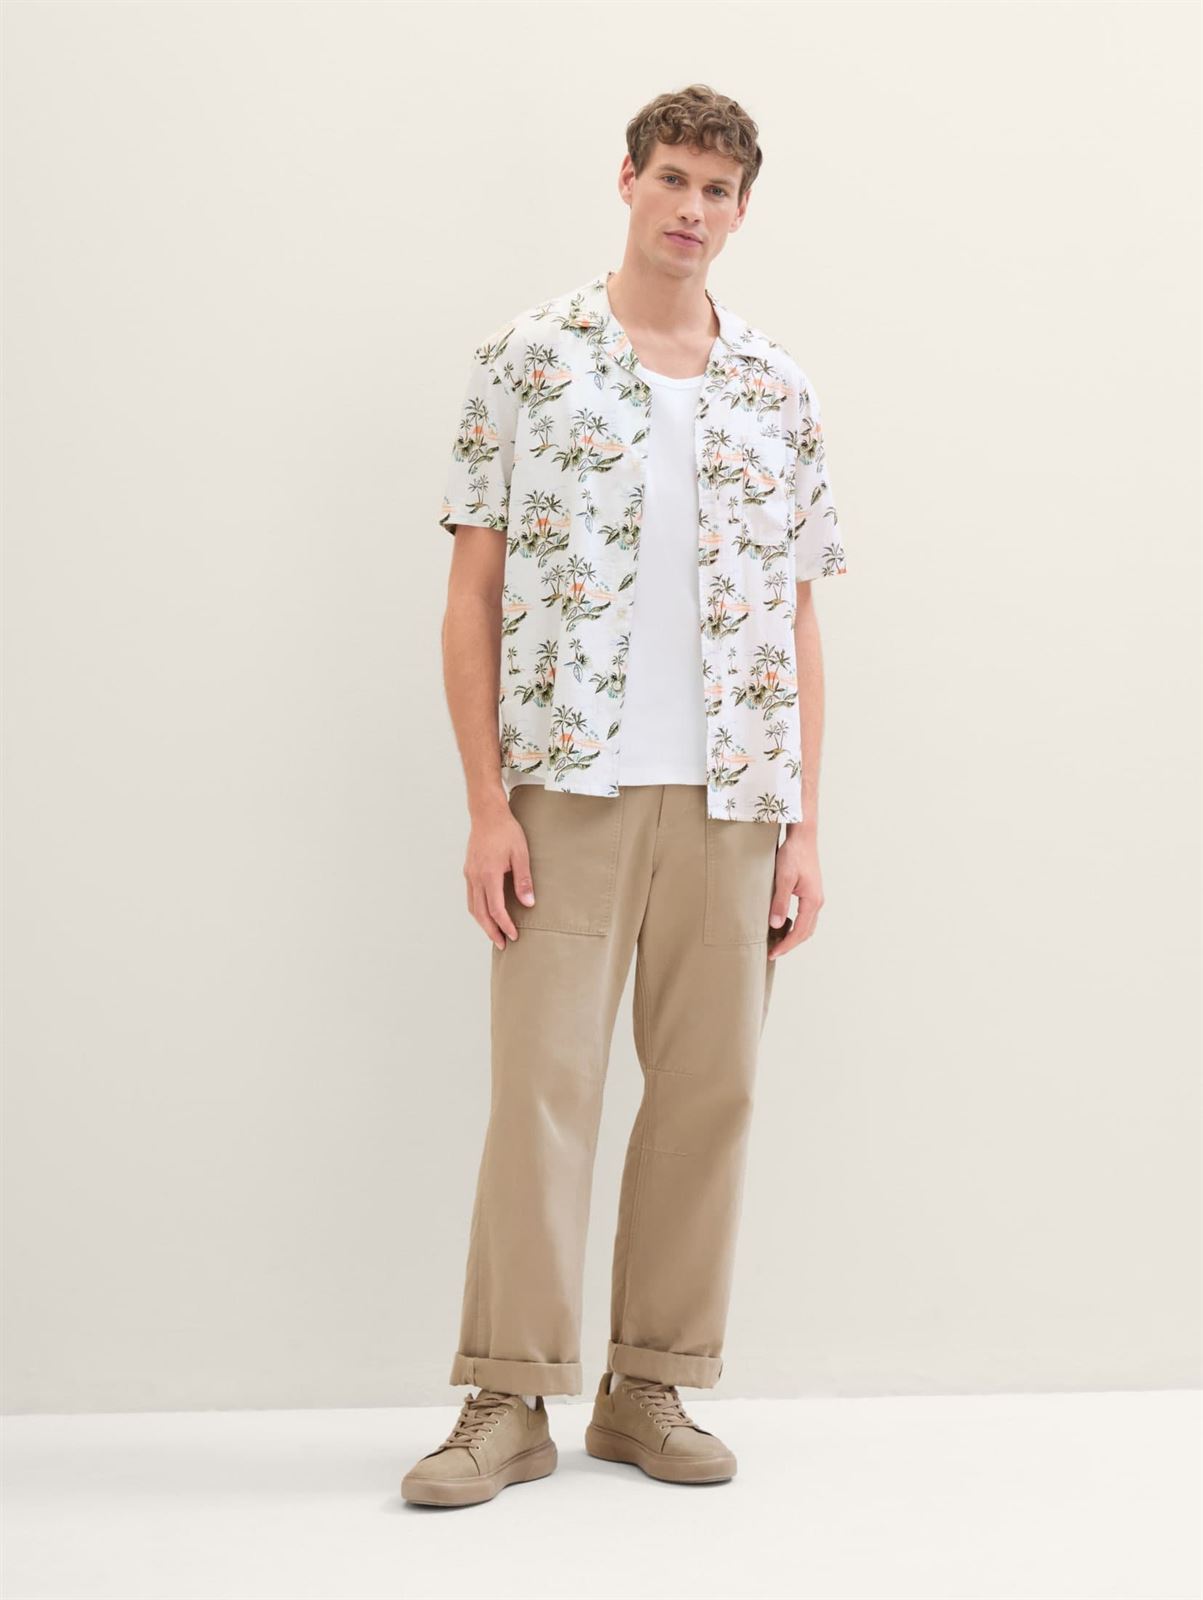 Camisa Tom Tailor 1040992 35054 relaxed viscose, white tropical print - Imagen 1